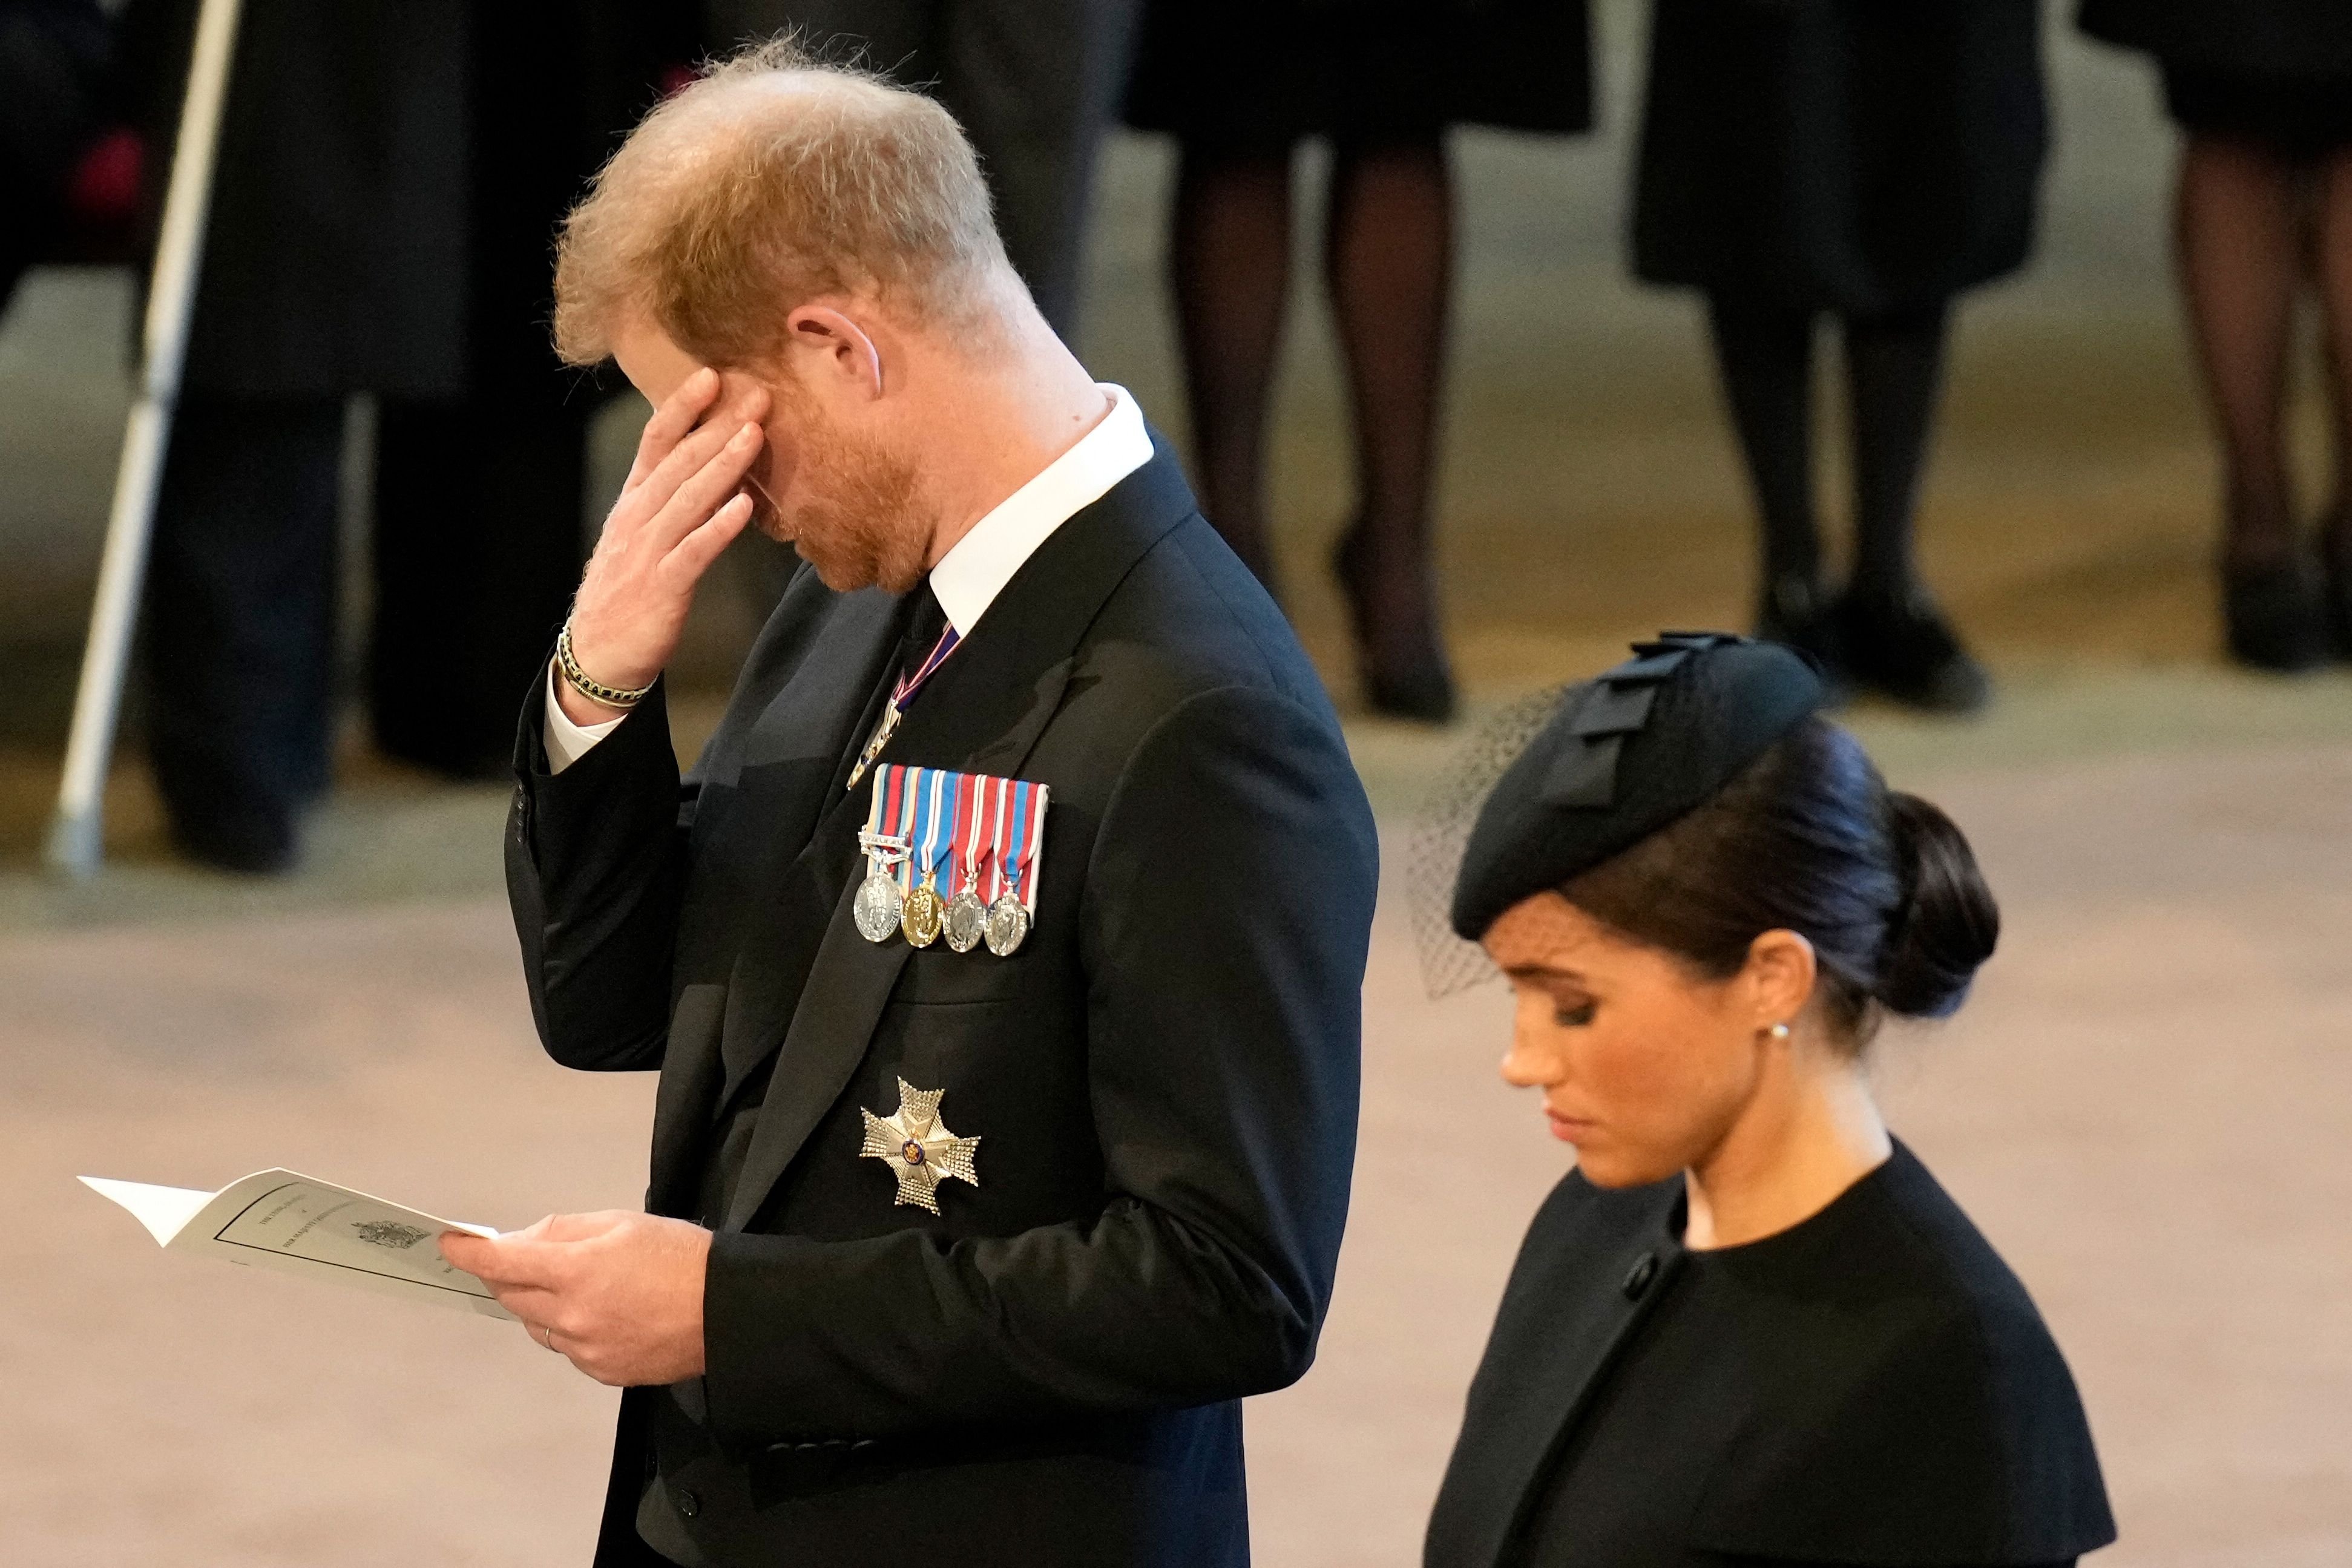 Prince Harry and Meghan Markle at the Queen's funeral at Westminster Abbey in 2022. | Source: Getty Images 